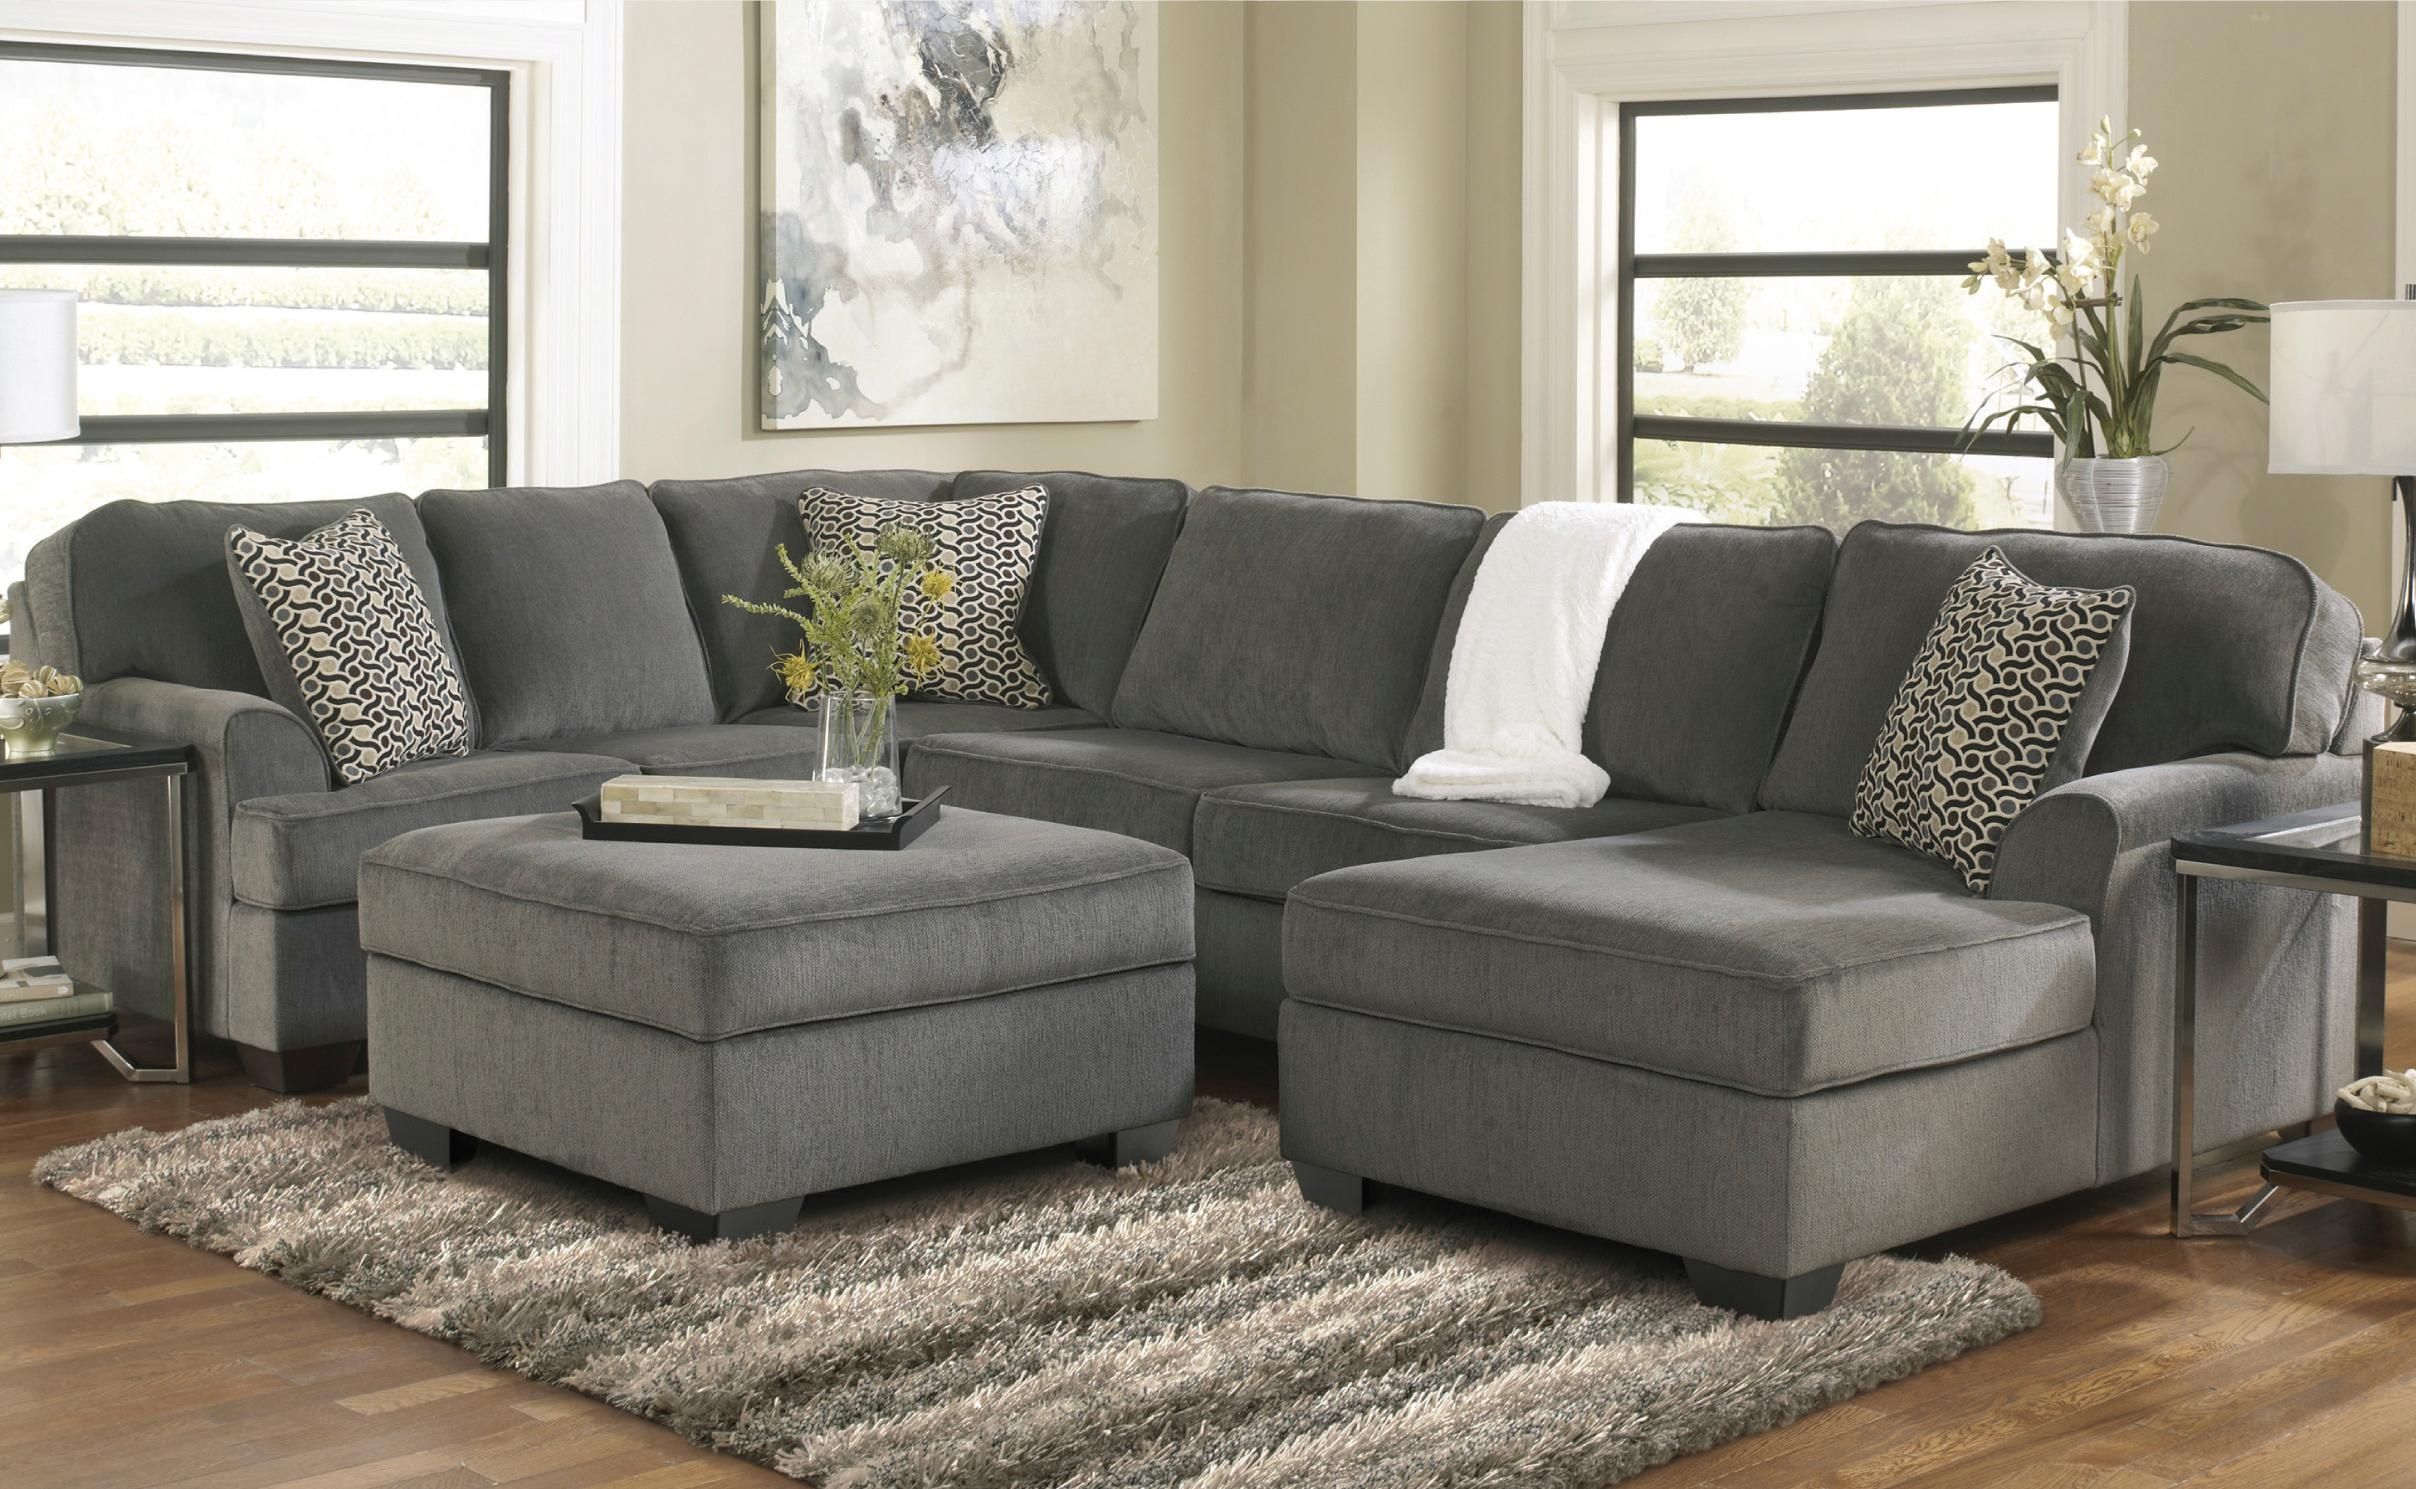 Clearance Furniture In Chicago | Darvin Clearance Regarding Closeout Sofas (View 1 of 20)